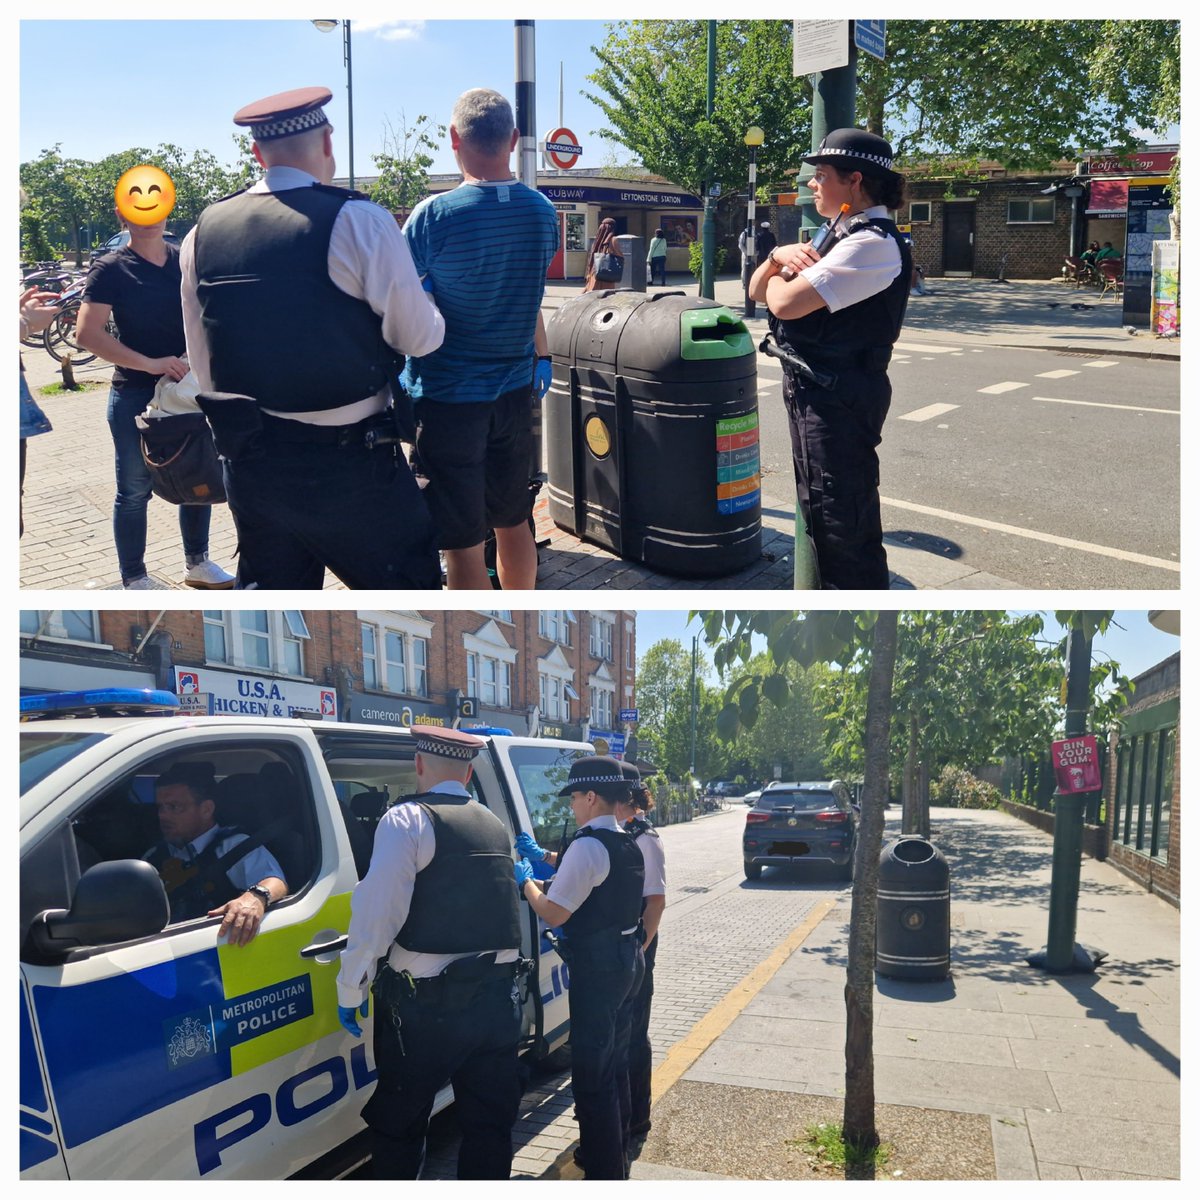 Team is on the beat today , so far completed : - reassurance/targeted patrols in the hot spot areas - spoke to local residents and provided crime prevention advice - male arrested for contempt of court @wfcouncil